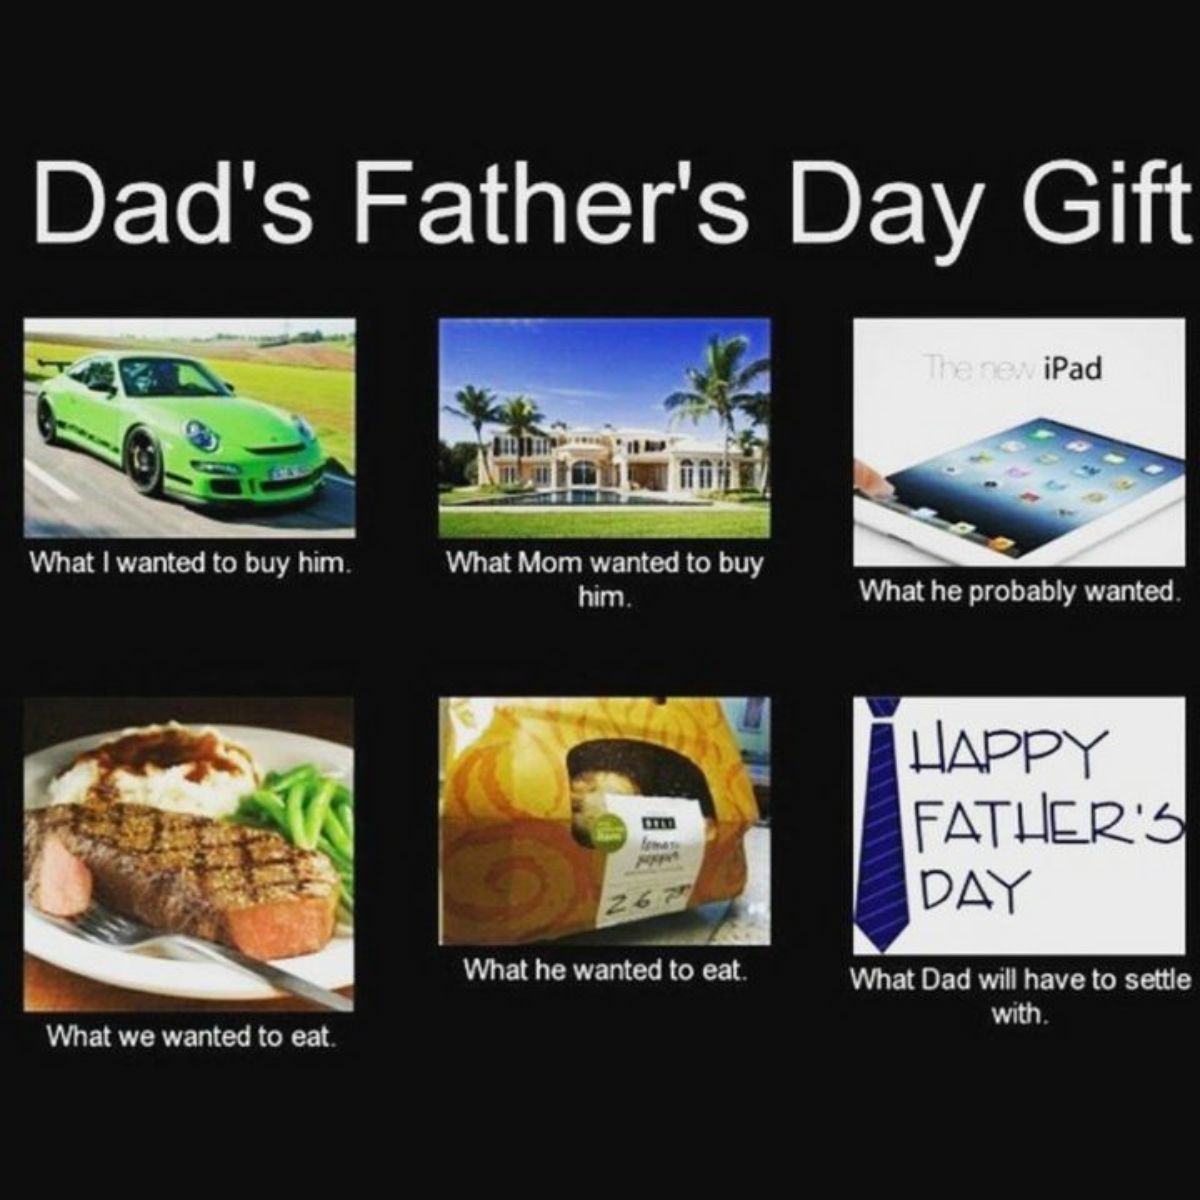 memes for fathers - Dad's Father's Day Gift The new iPad What I wanted to buy him. What Mom wanted to buy him. What he probably wanted. temas popper What he wanted to eat. What we wanted to eat. Happy Father'S Day What Dad will have to settle with.